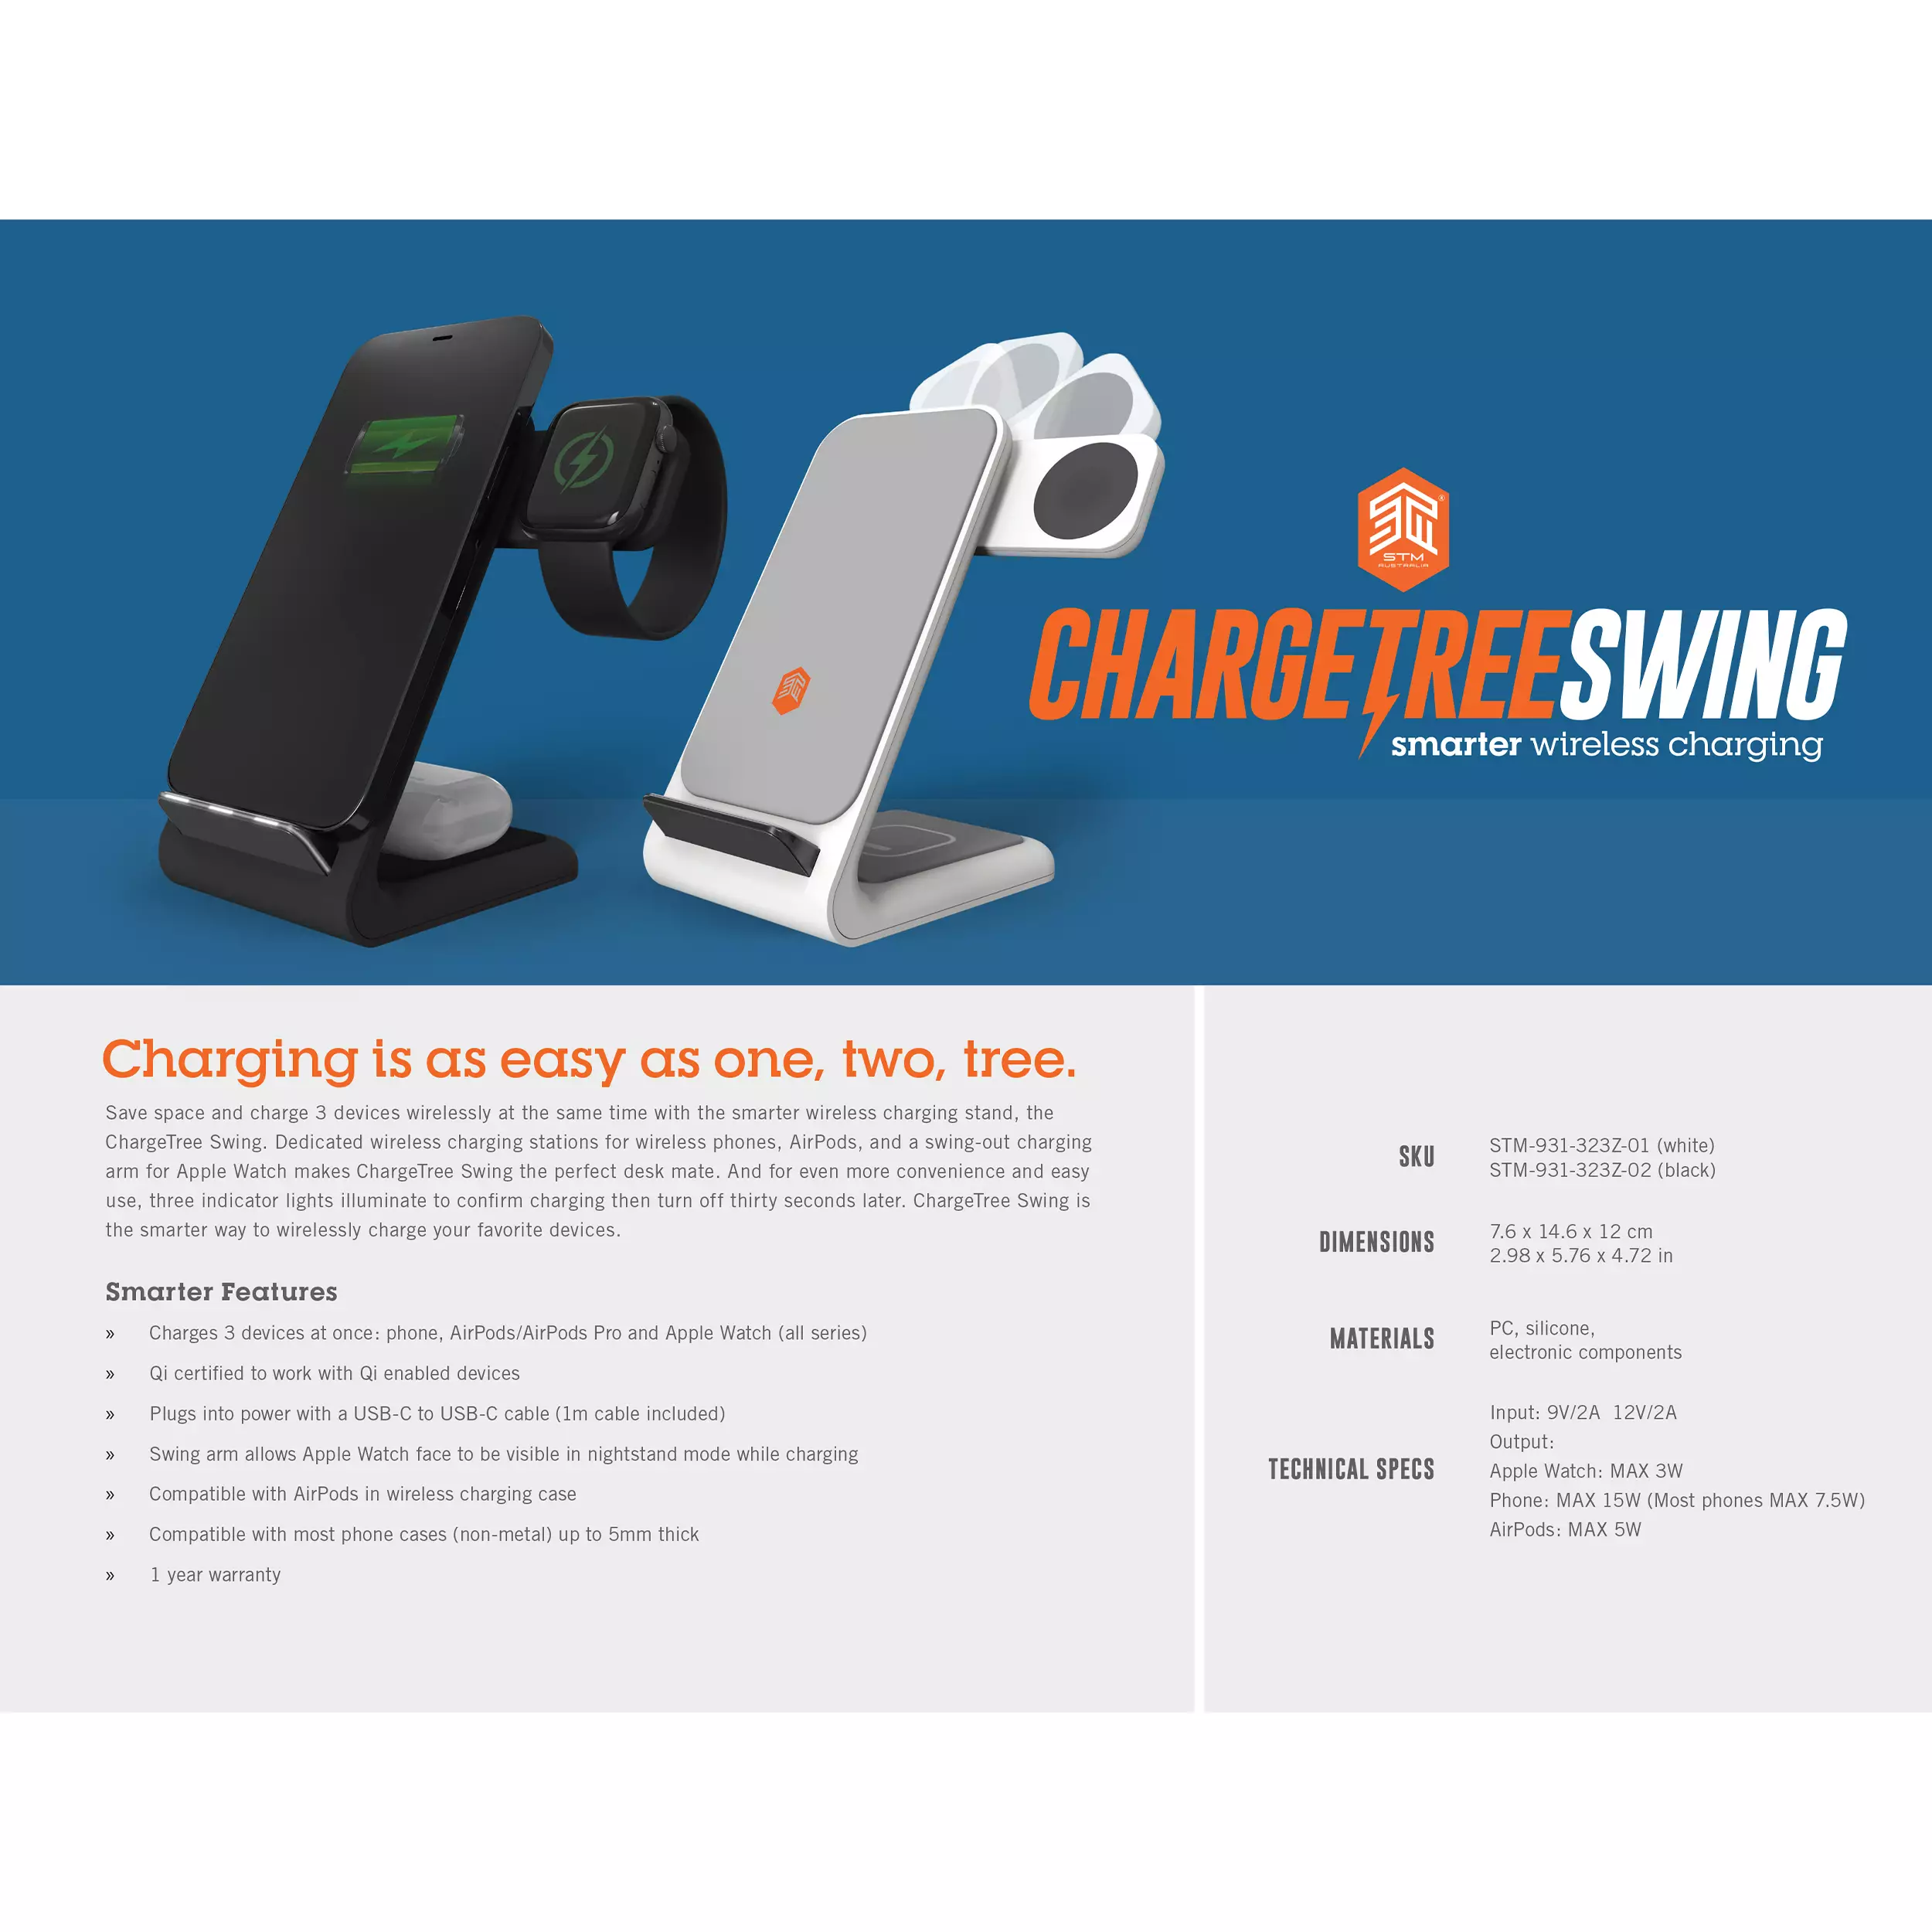 ChargeTree Swing Multi Device Charging Station